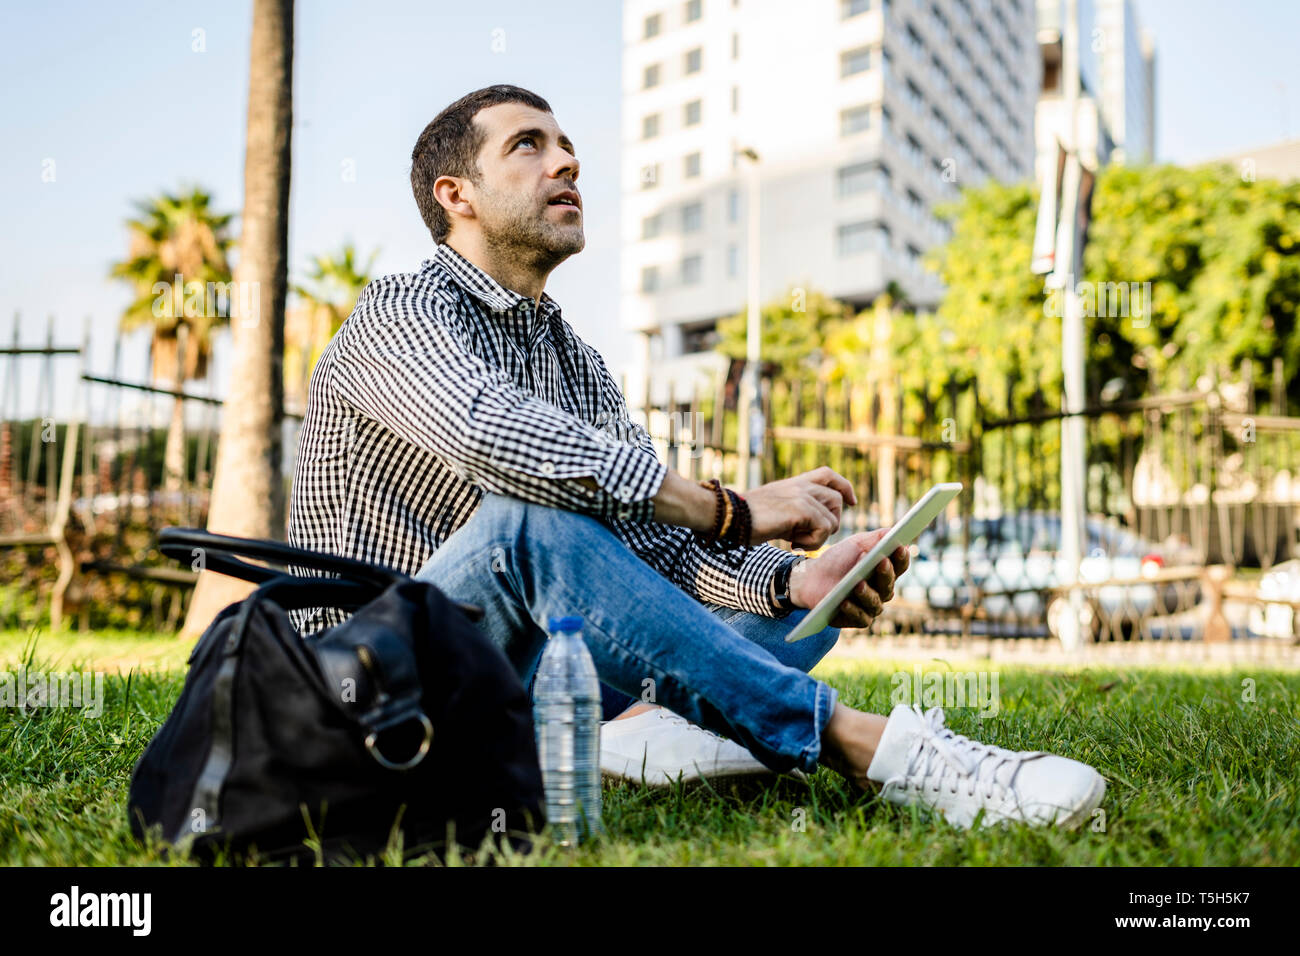 Man sitting on meadow in city park with digital tablet looking up Stock Photo